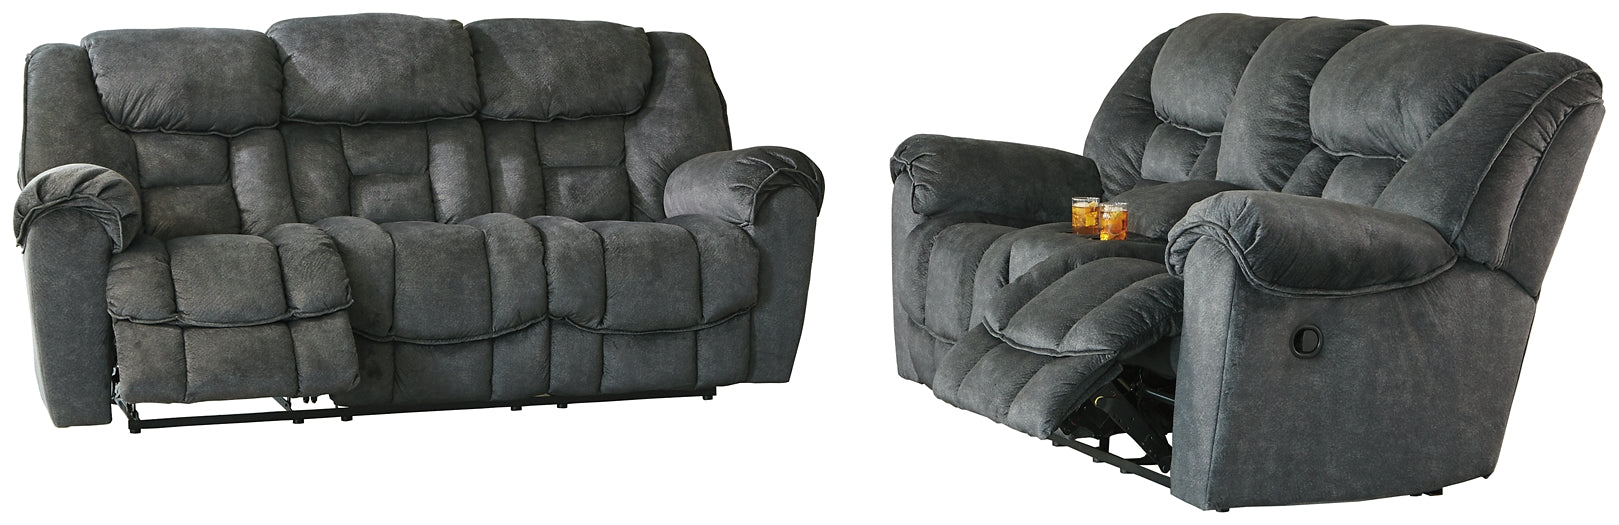 Capehorn Sofa and Loveseat JB's Furniture  Home Furniture, Home Decor, Furniture Store